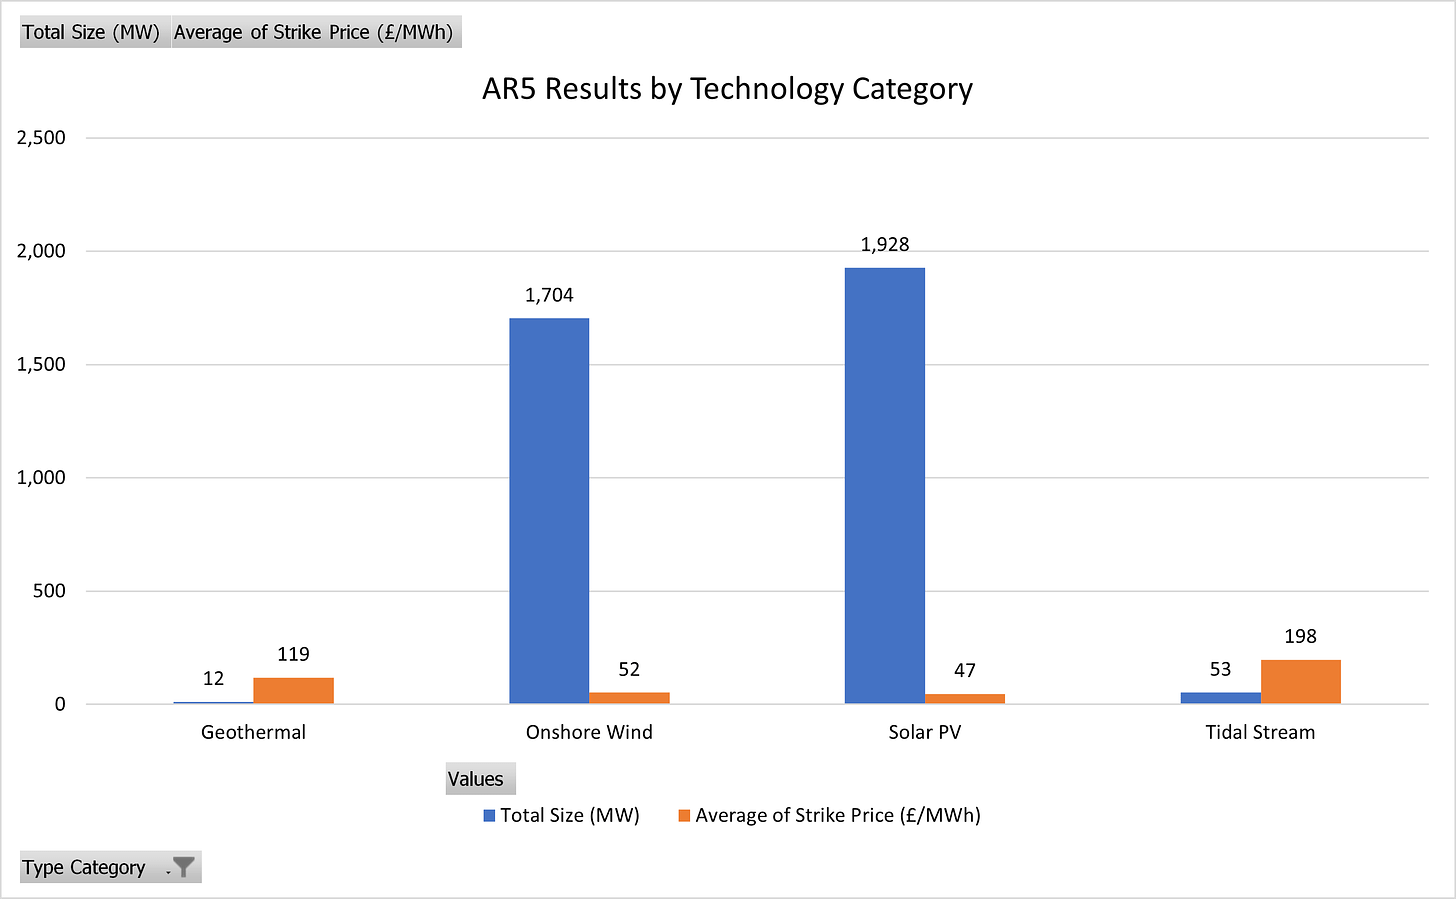 Figure 1 - AR5 Results by Technology Category (MW)